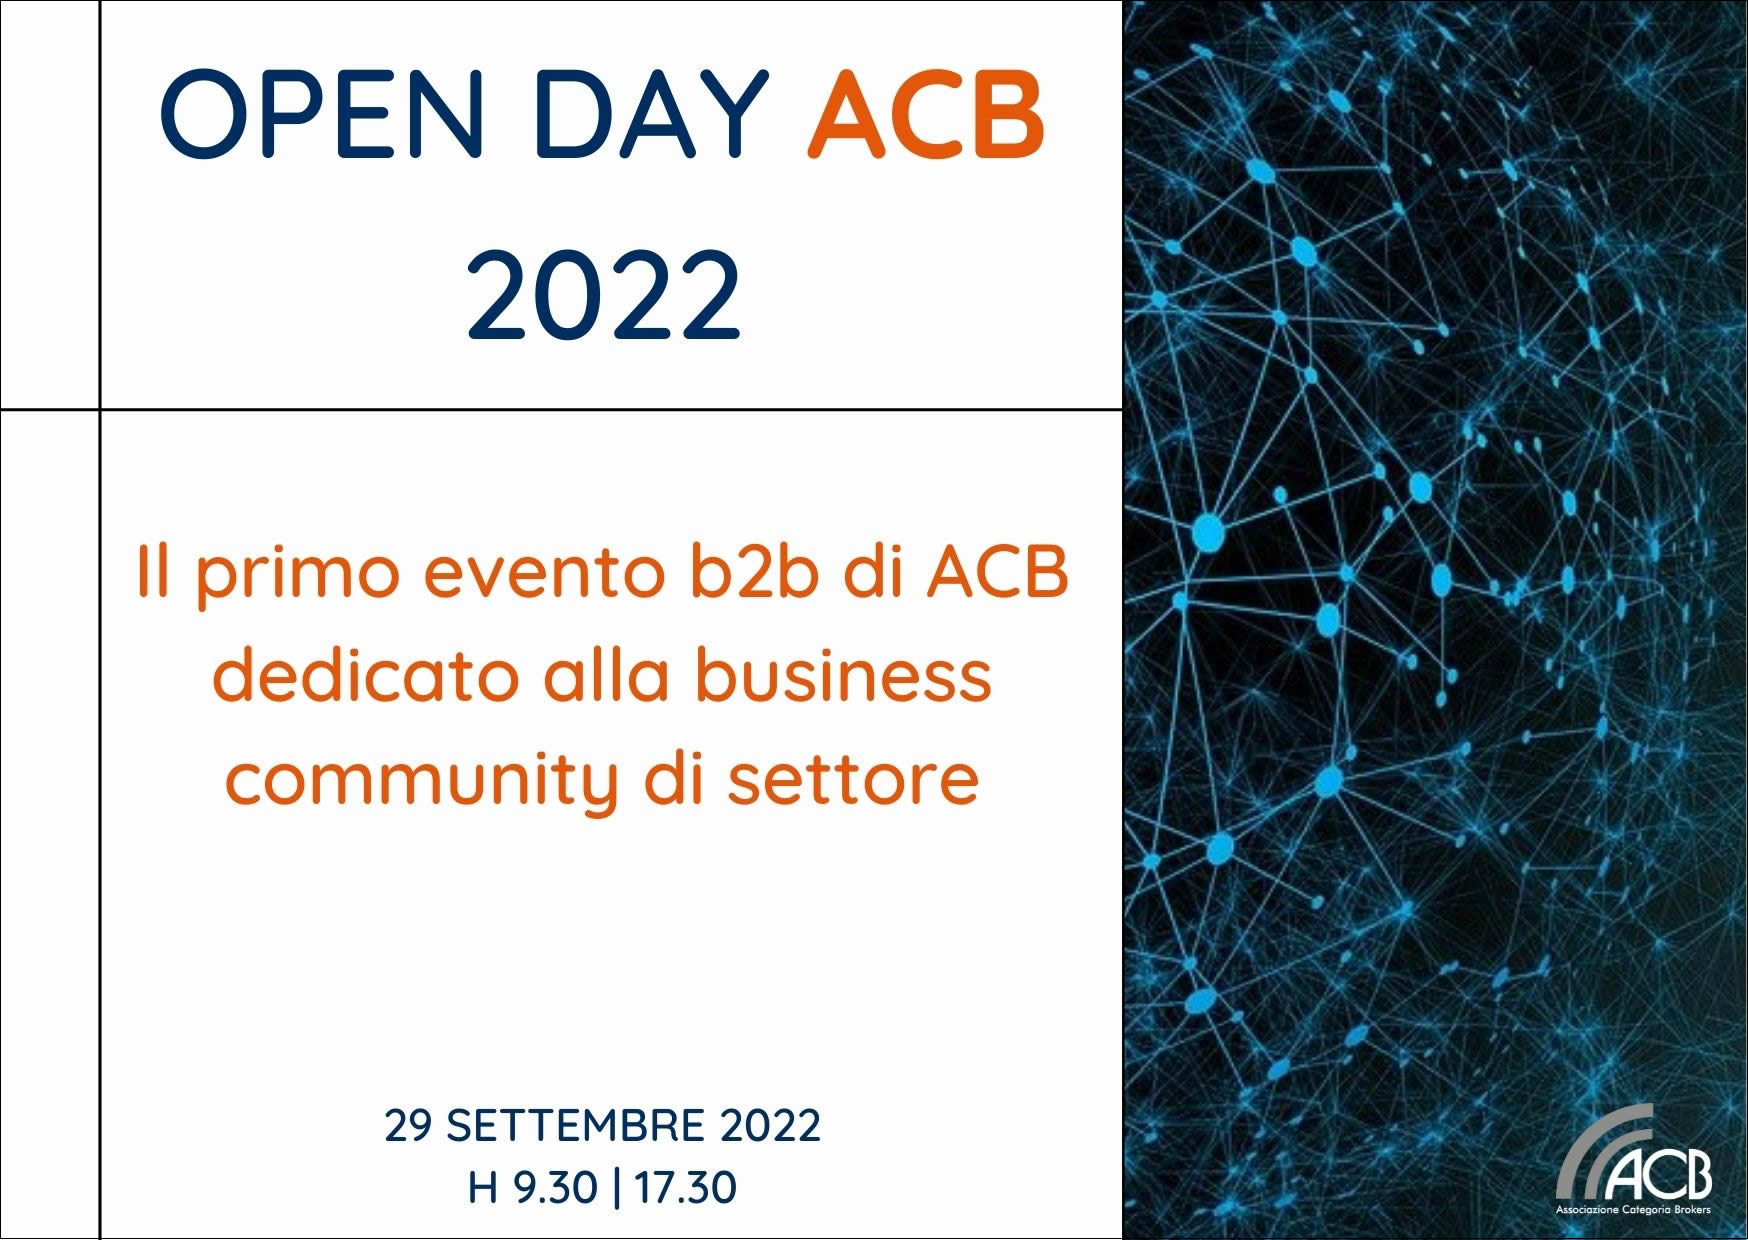 SAVE THE DATE: 29 SETTEMBRE 2022 - OPEN DAY ACB